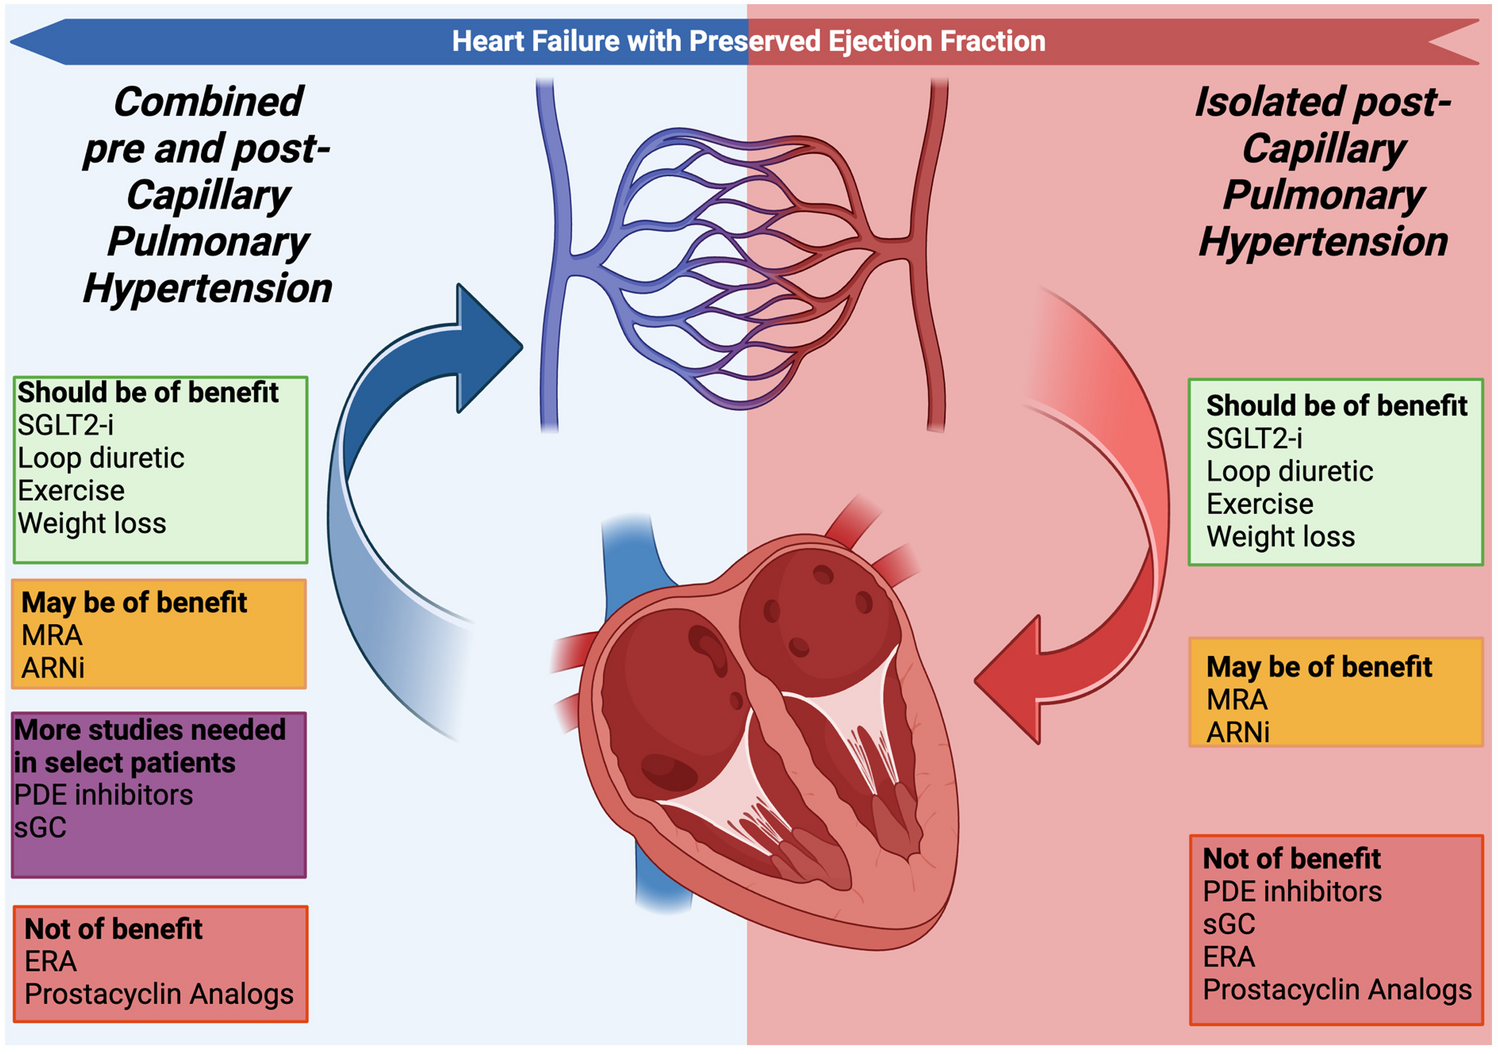 Management of Pulmonary Hypertension in the Context of Heart Failure with Preserved Ejection Fraction